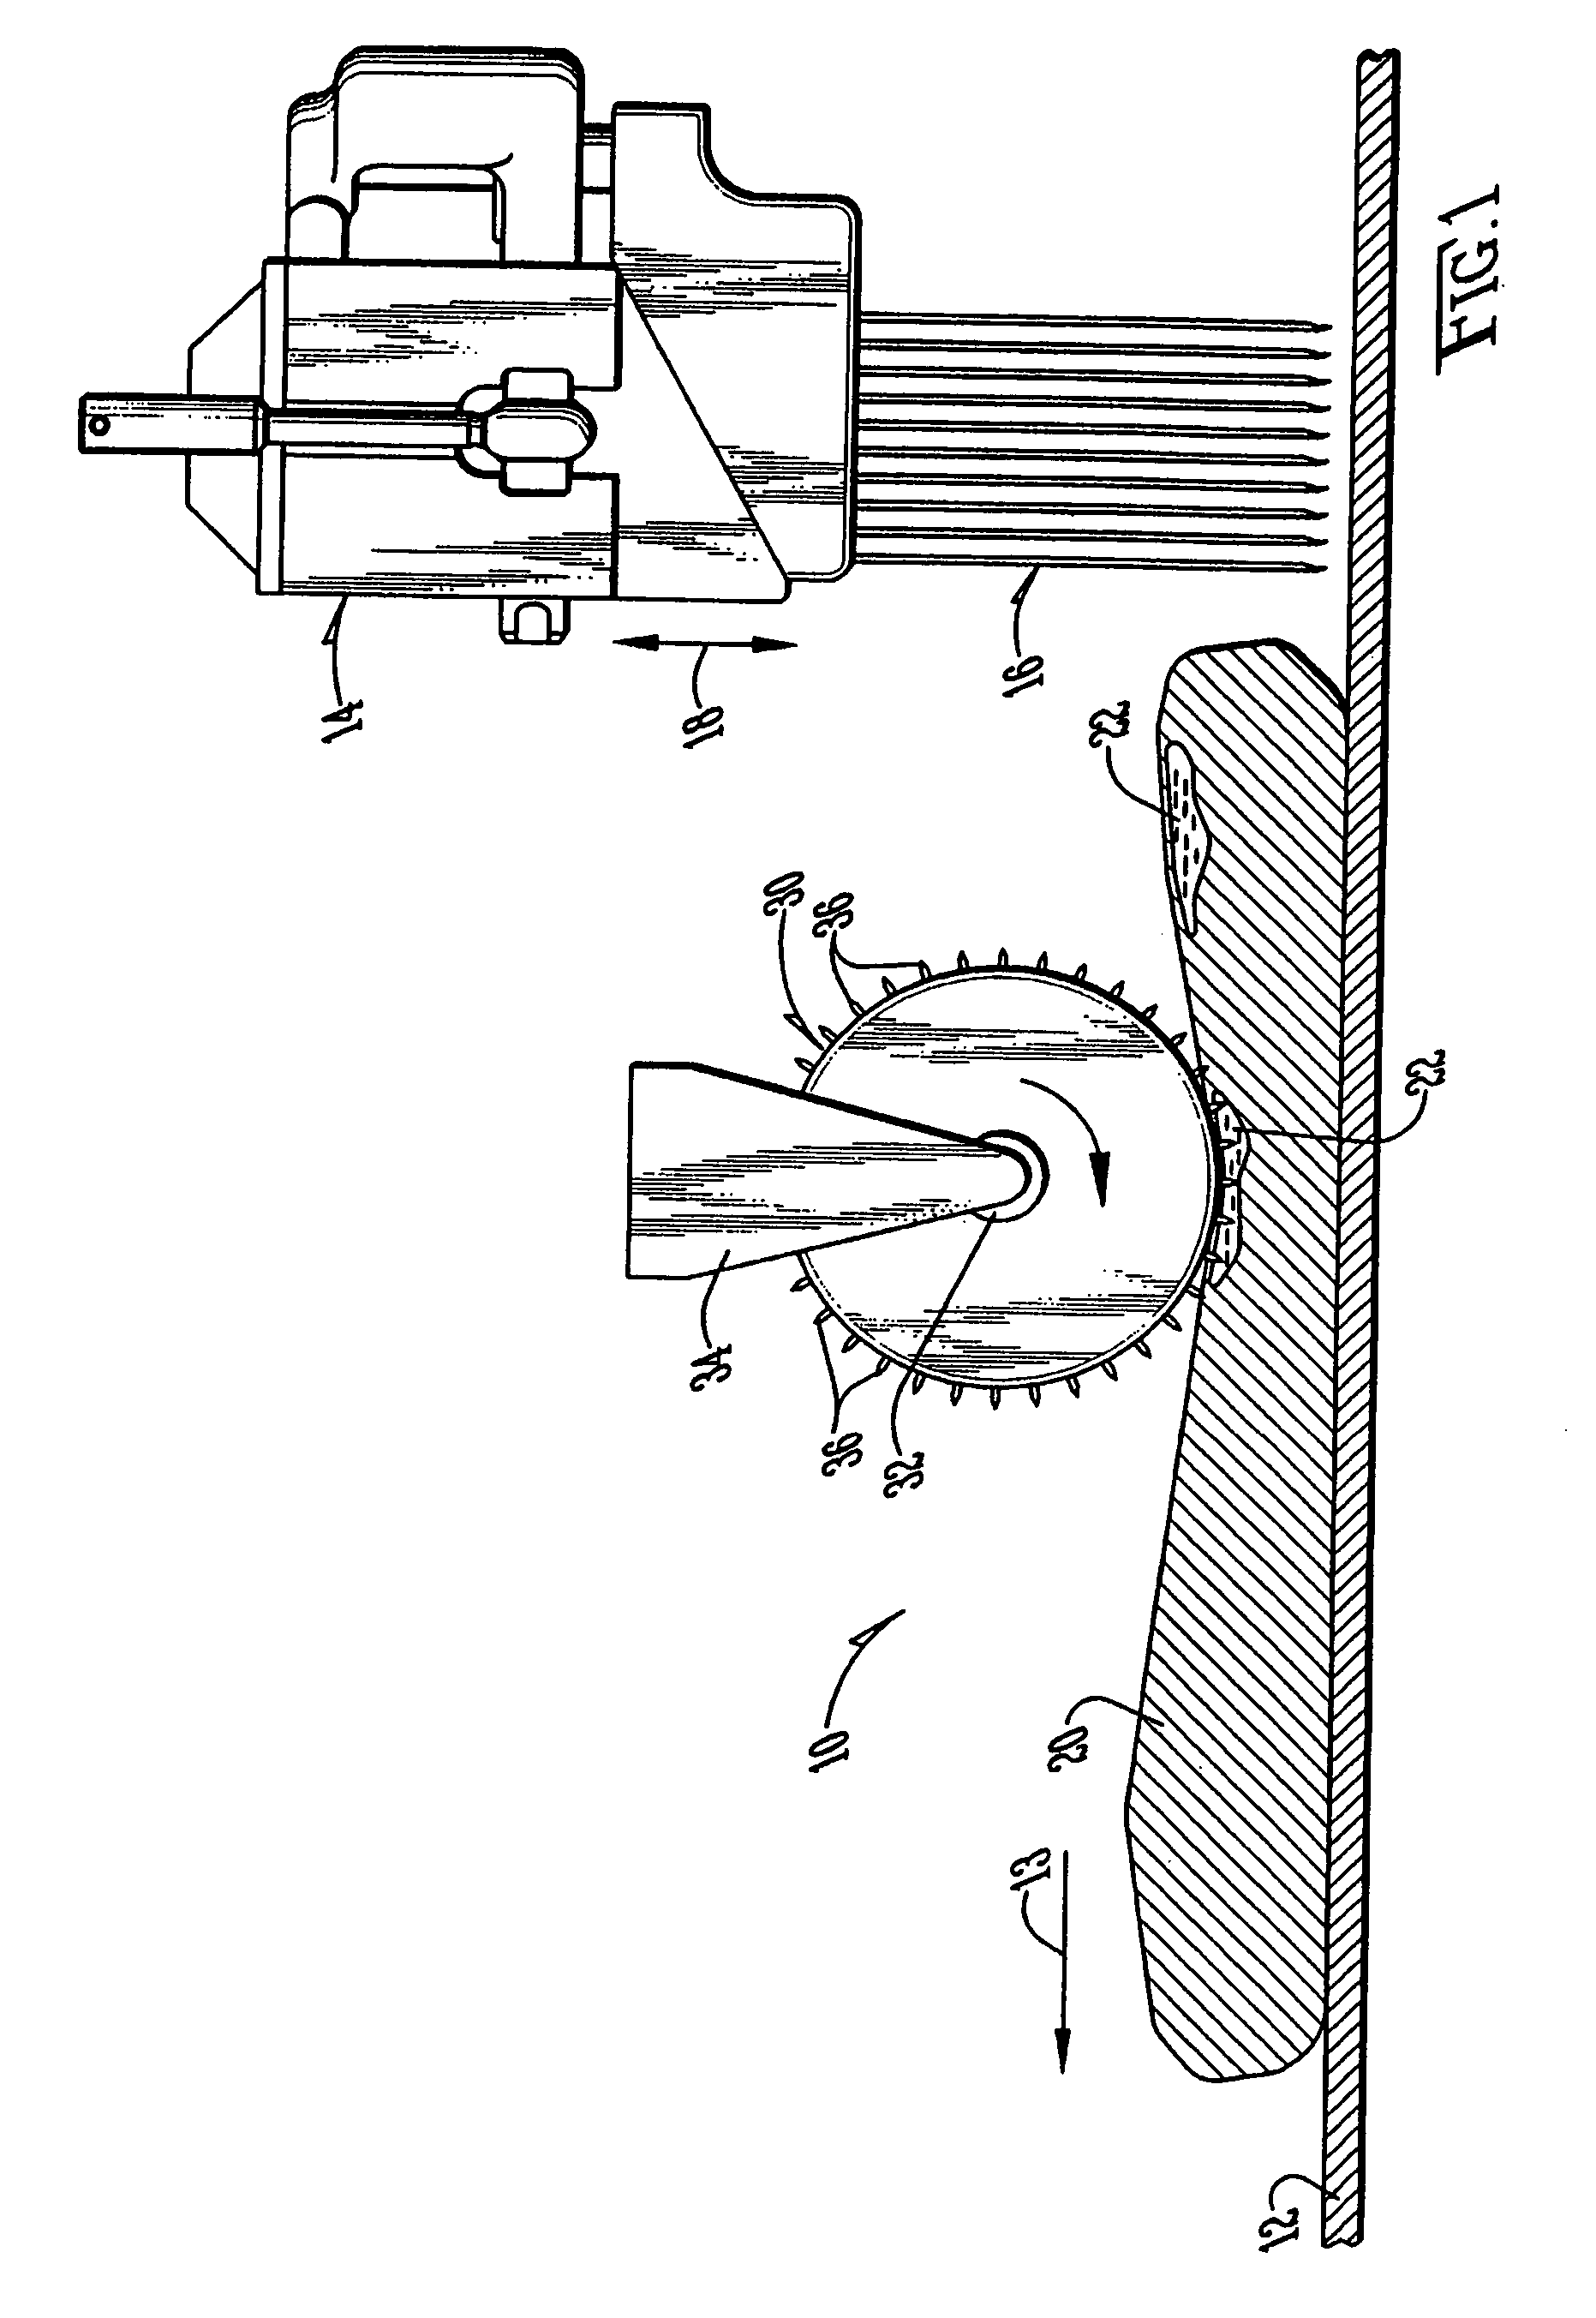 Method and apparatus for evacuating pockets of injected fluid in meat products